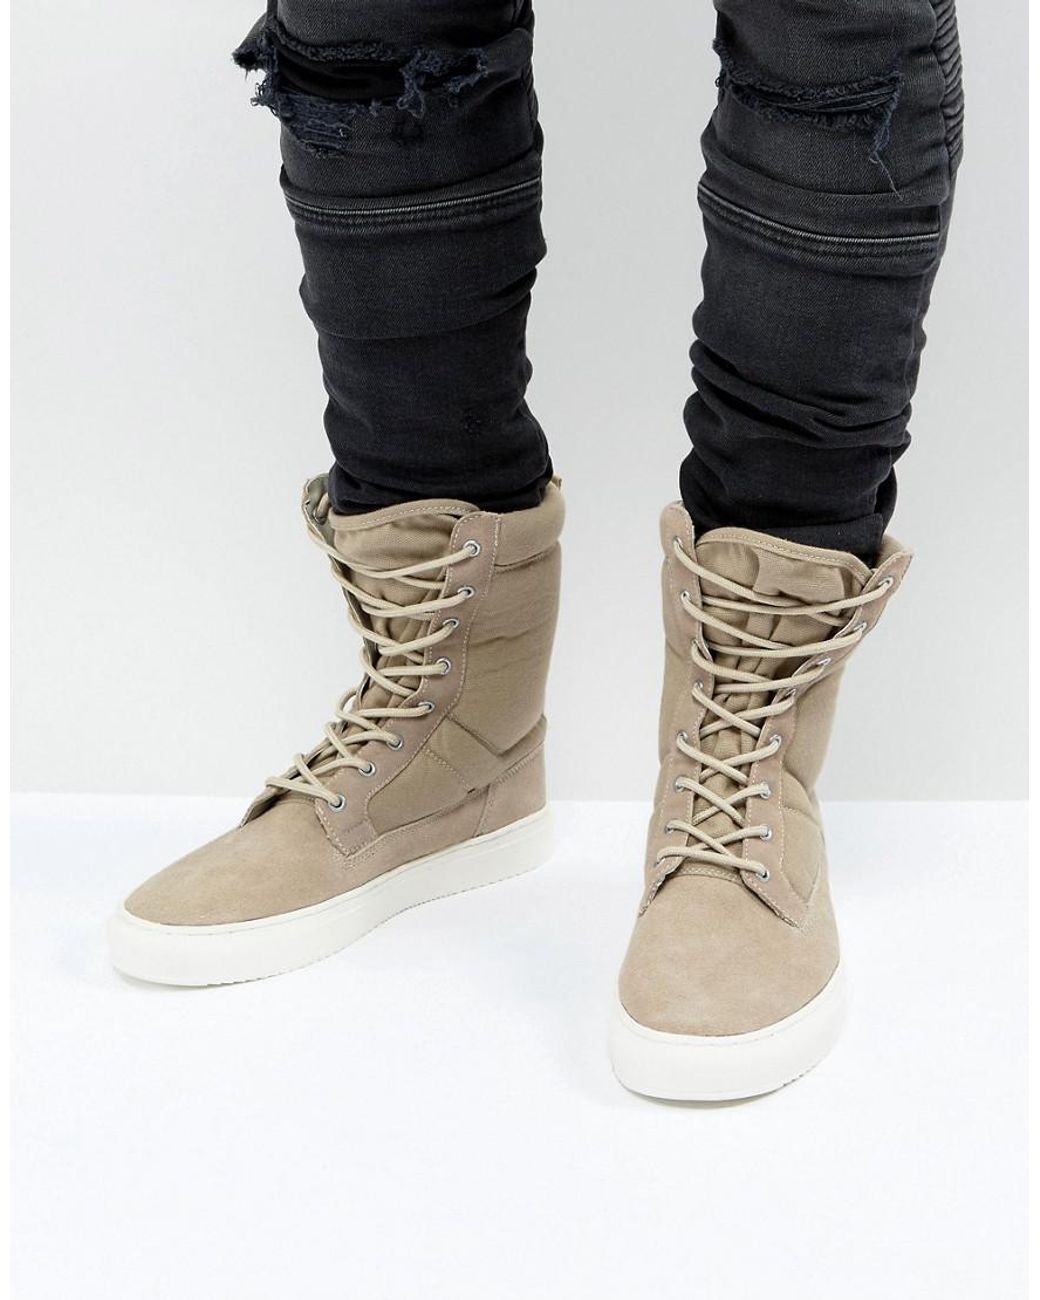 STM Design B-080- Colors High Sole Mens Sneaker Boots - Express  FreeShipping | eBay